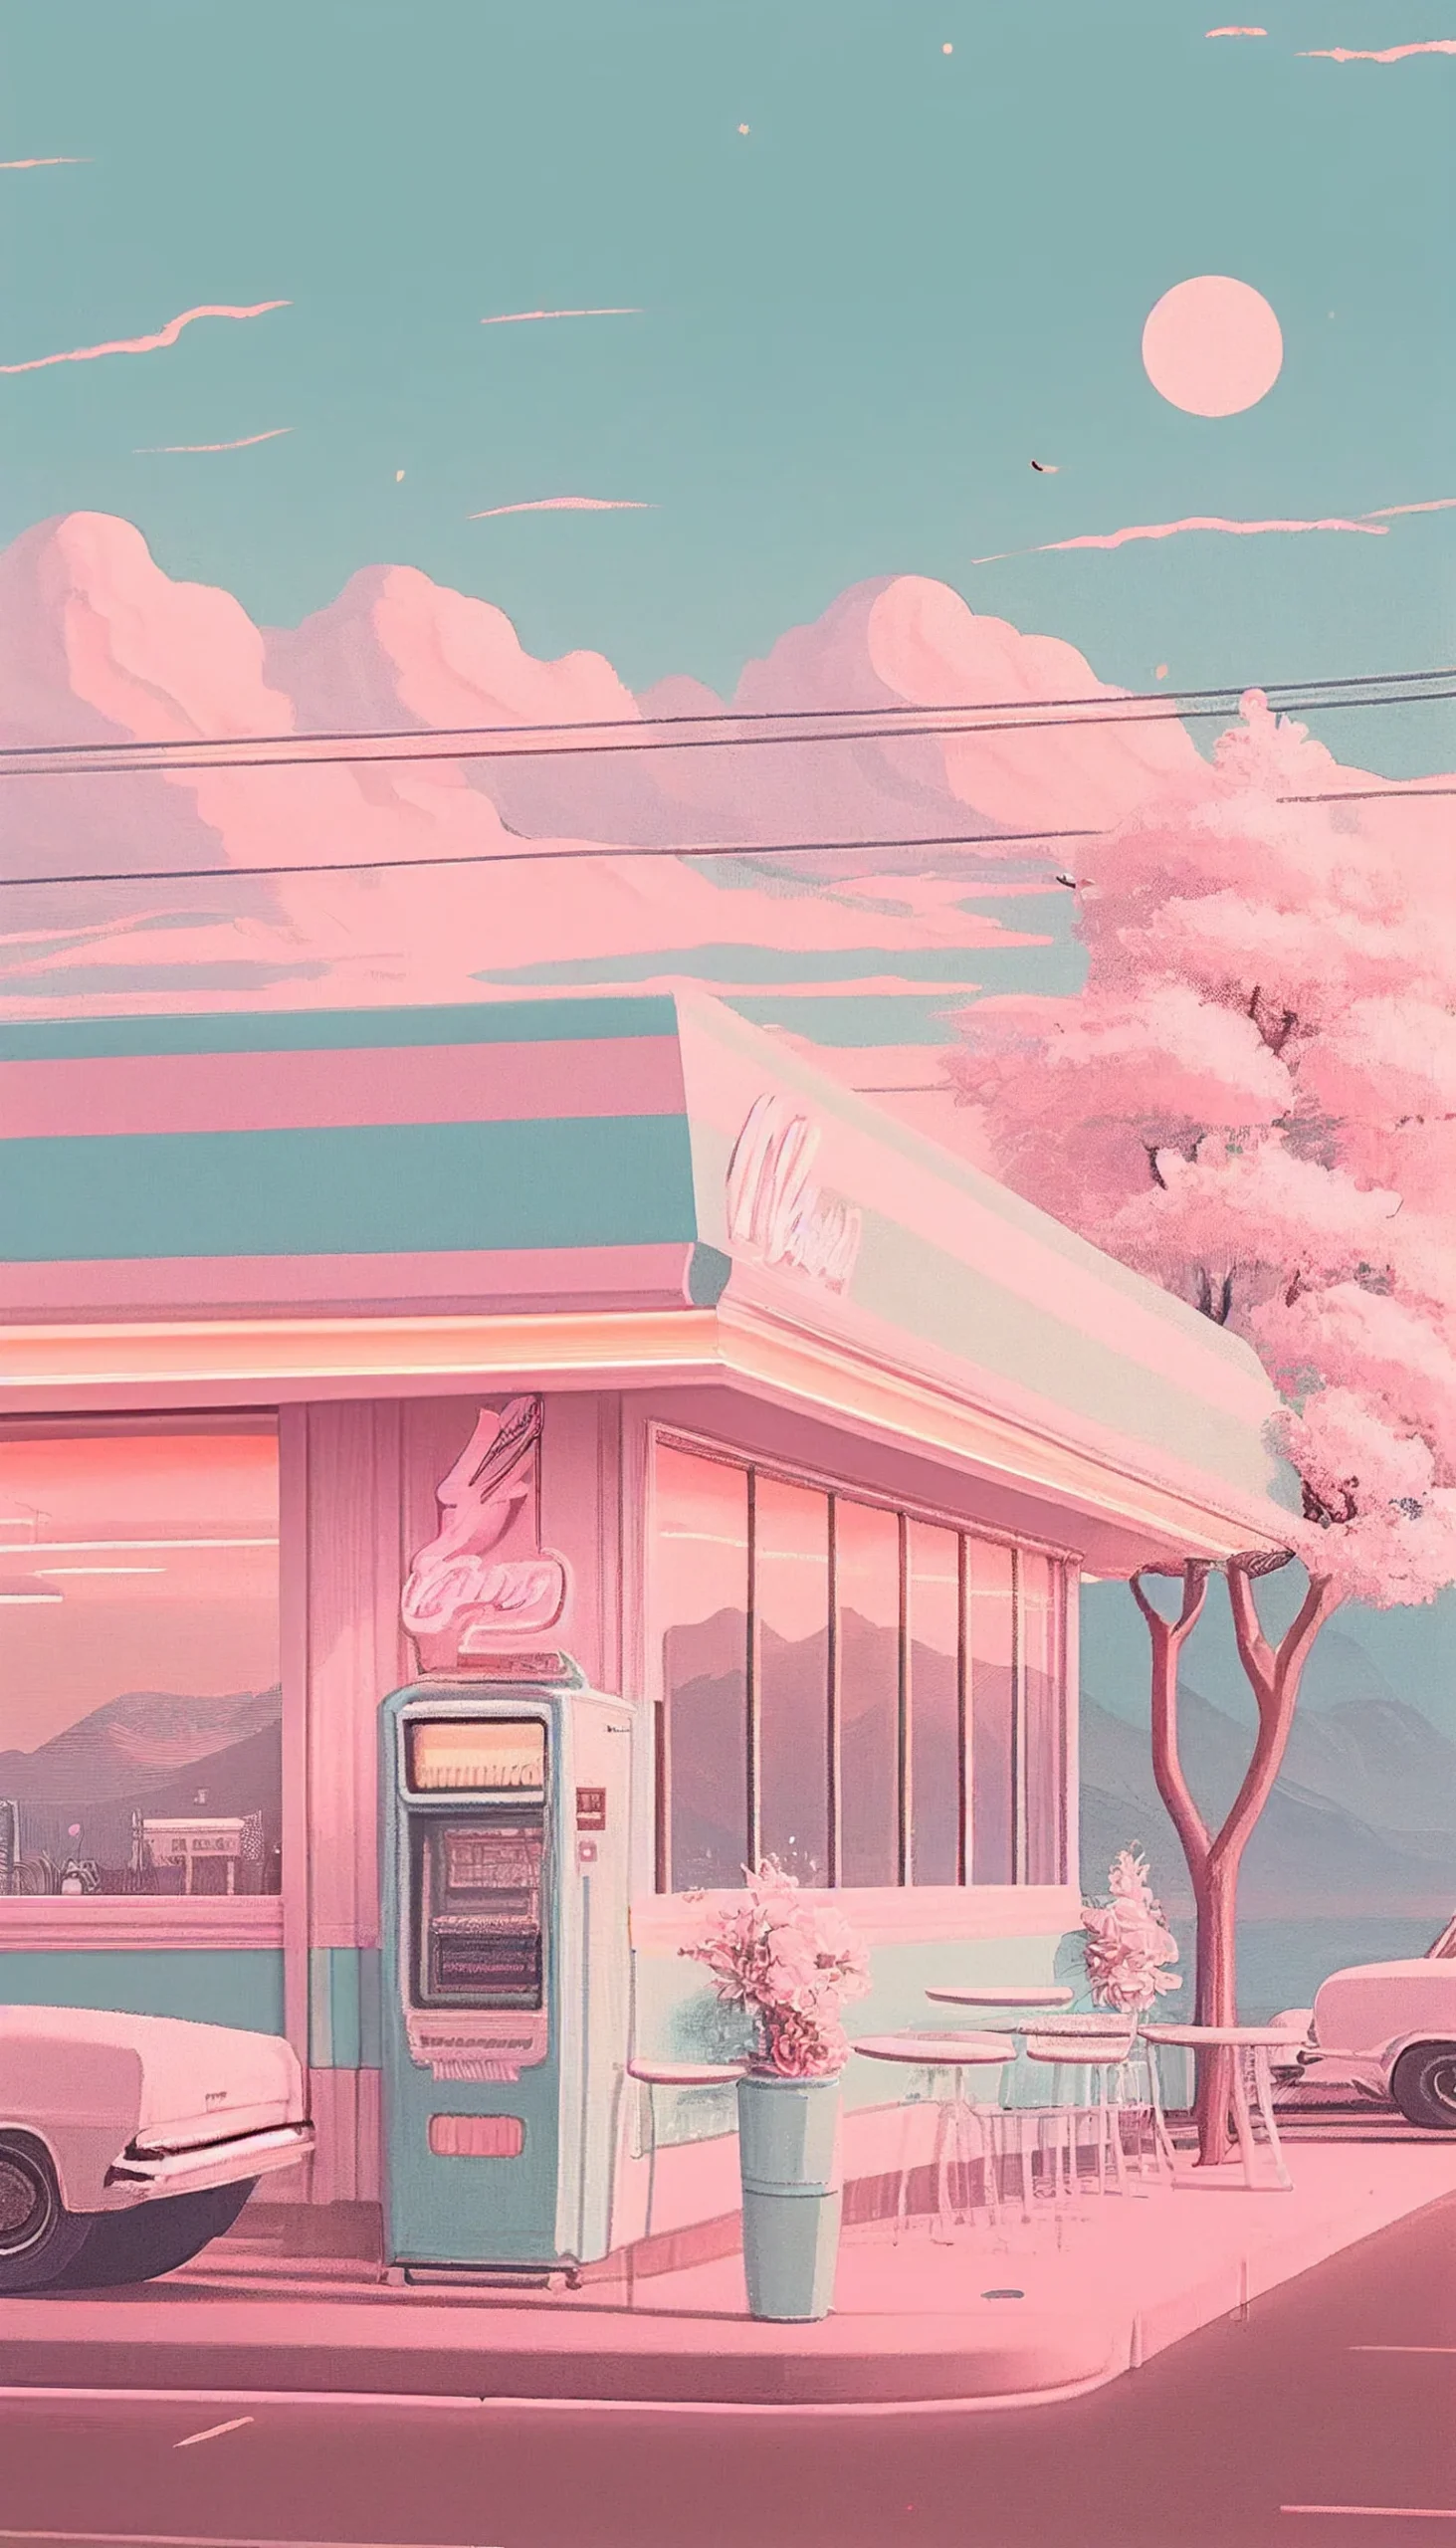 Stunning Pastel Aesthetic iPhone Wallpaper to Soothe Your Senses